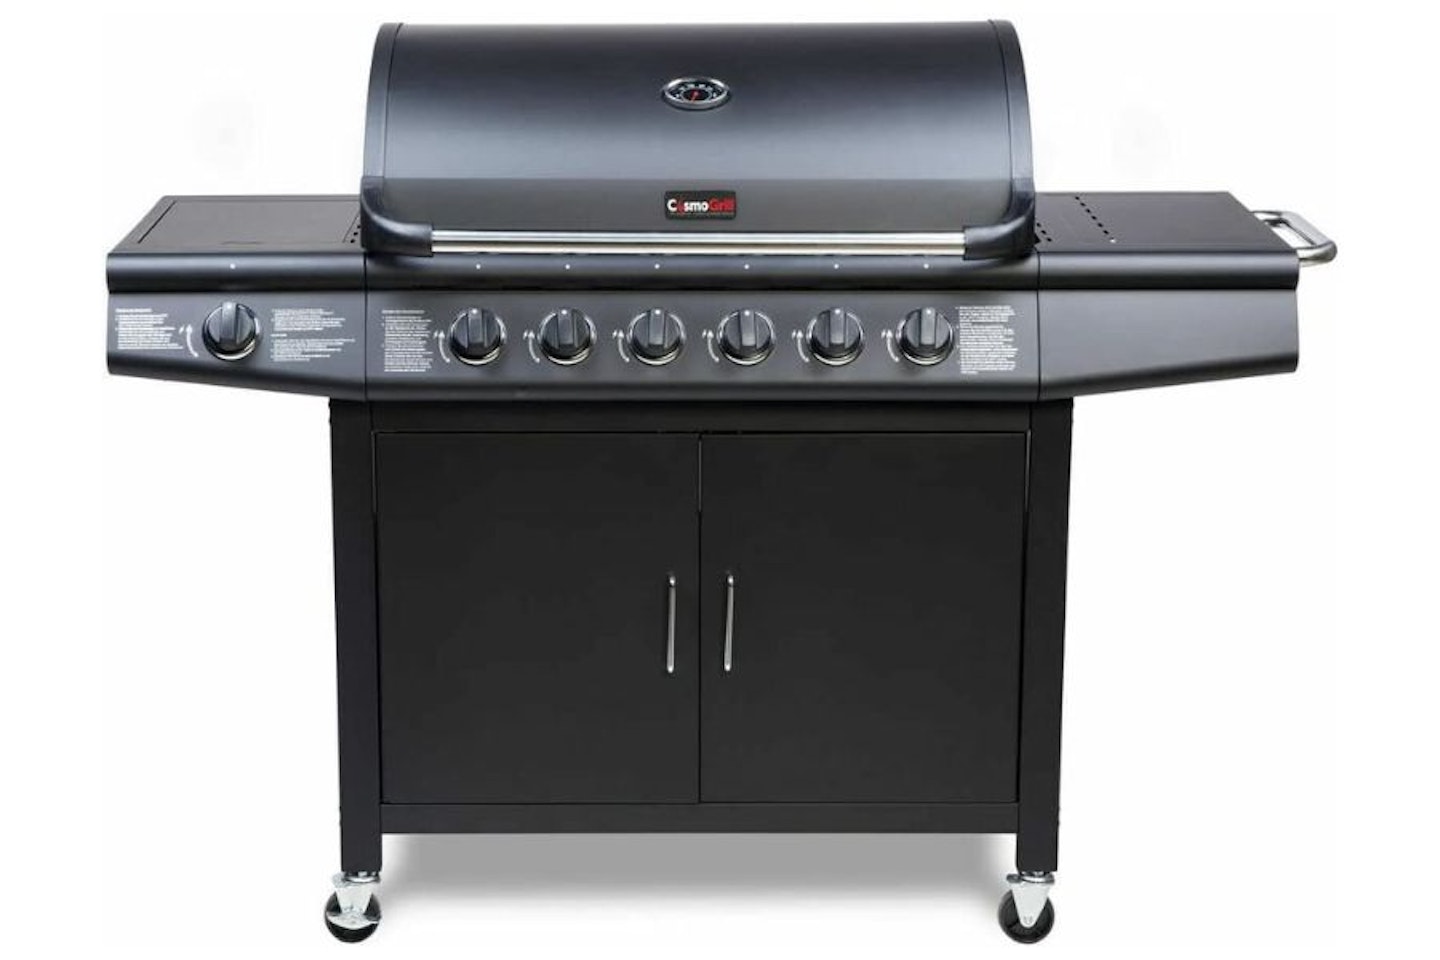 CosmoGrill Barbecue 6+1 Pro Gas Grill BBQ